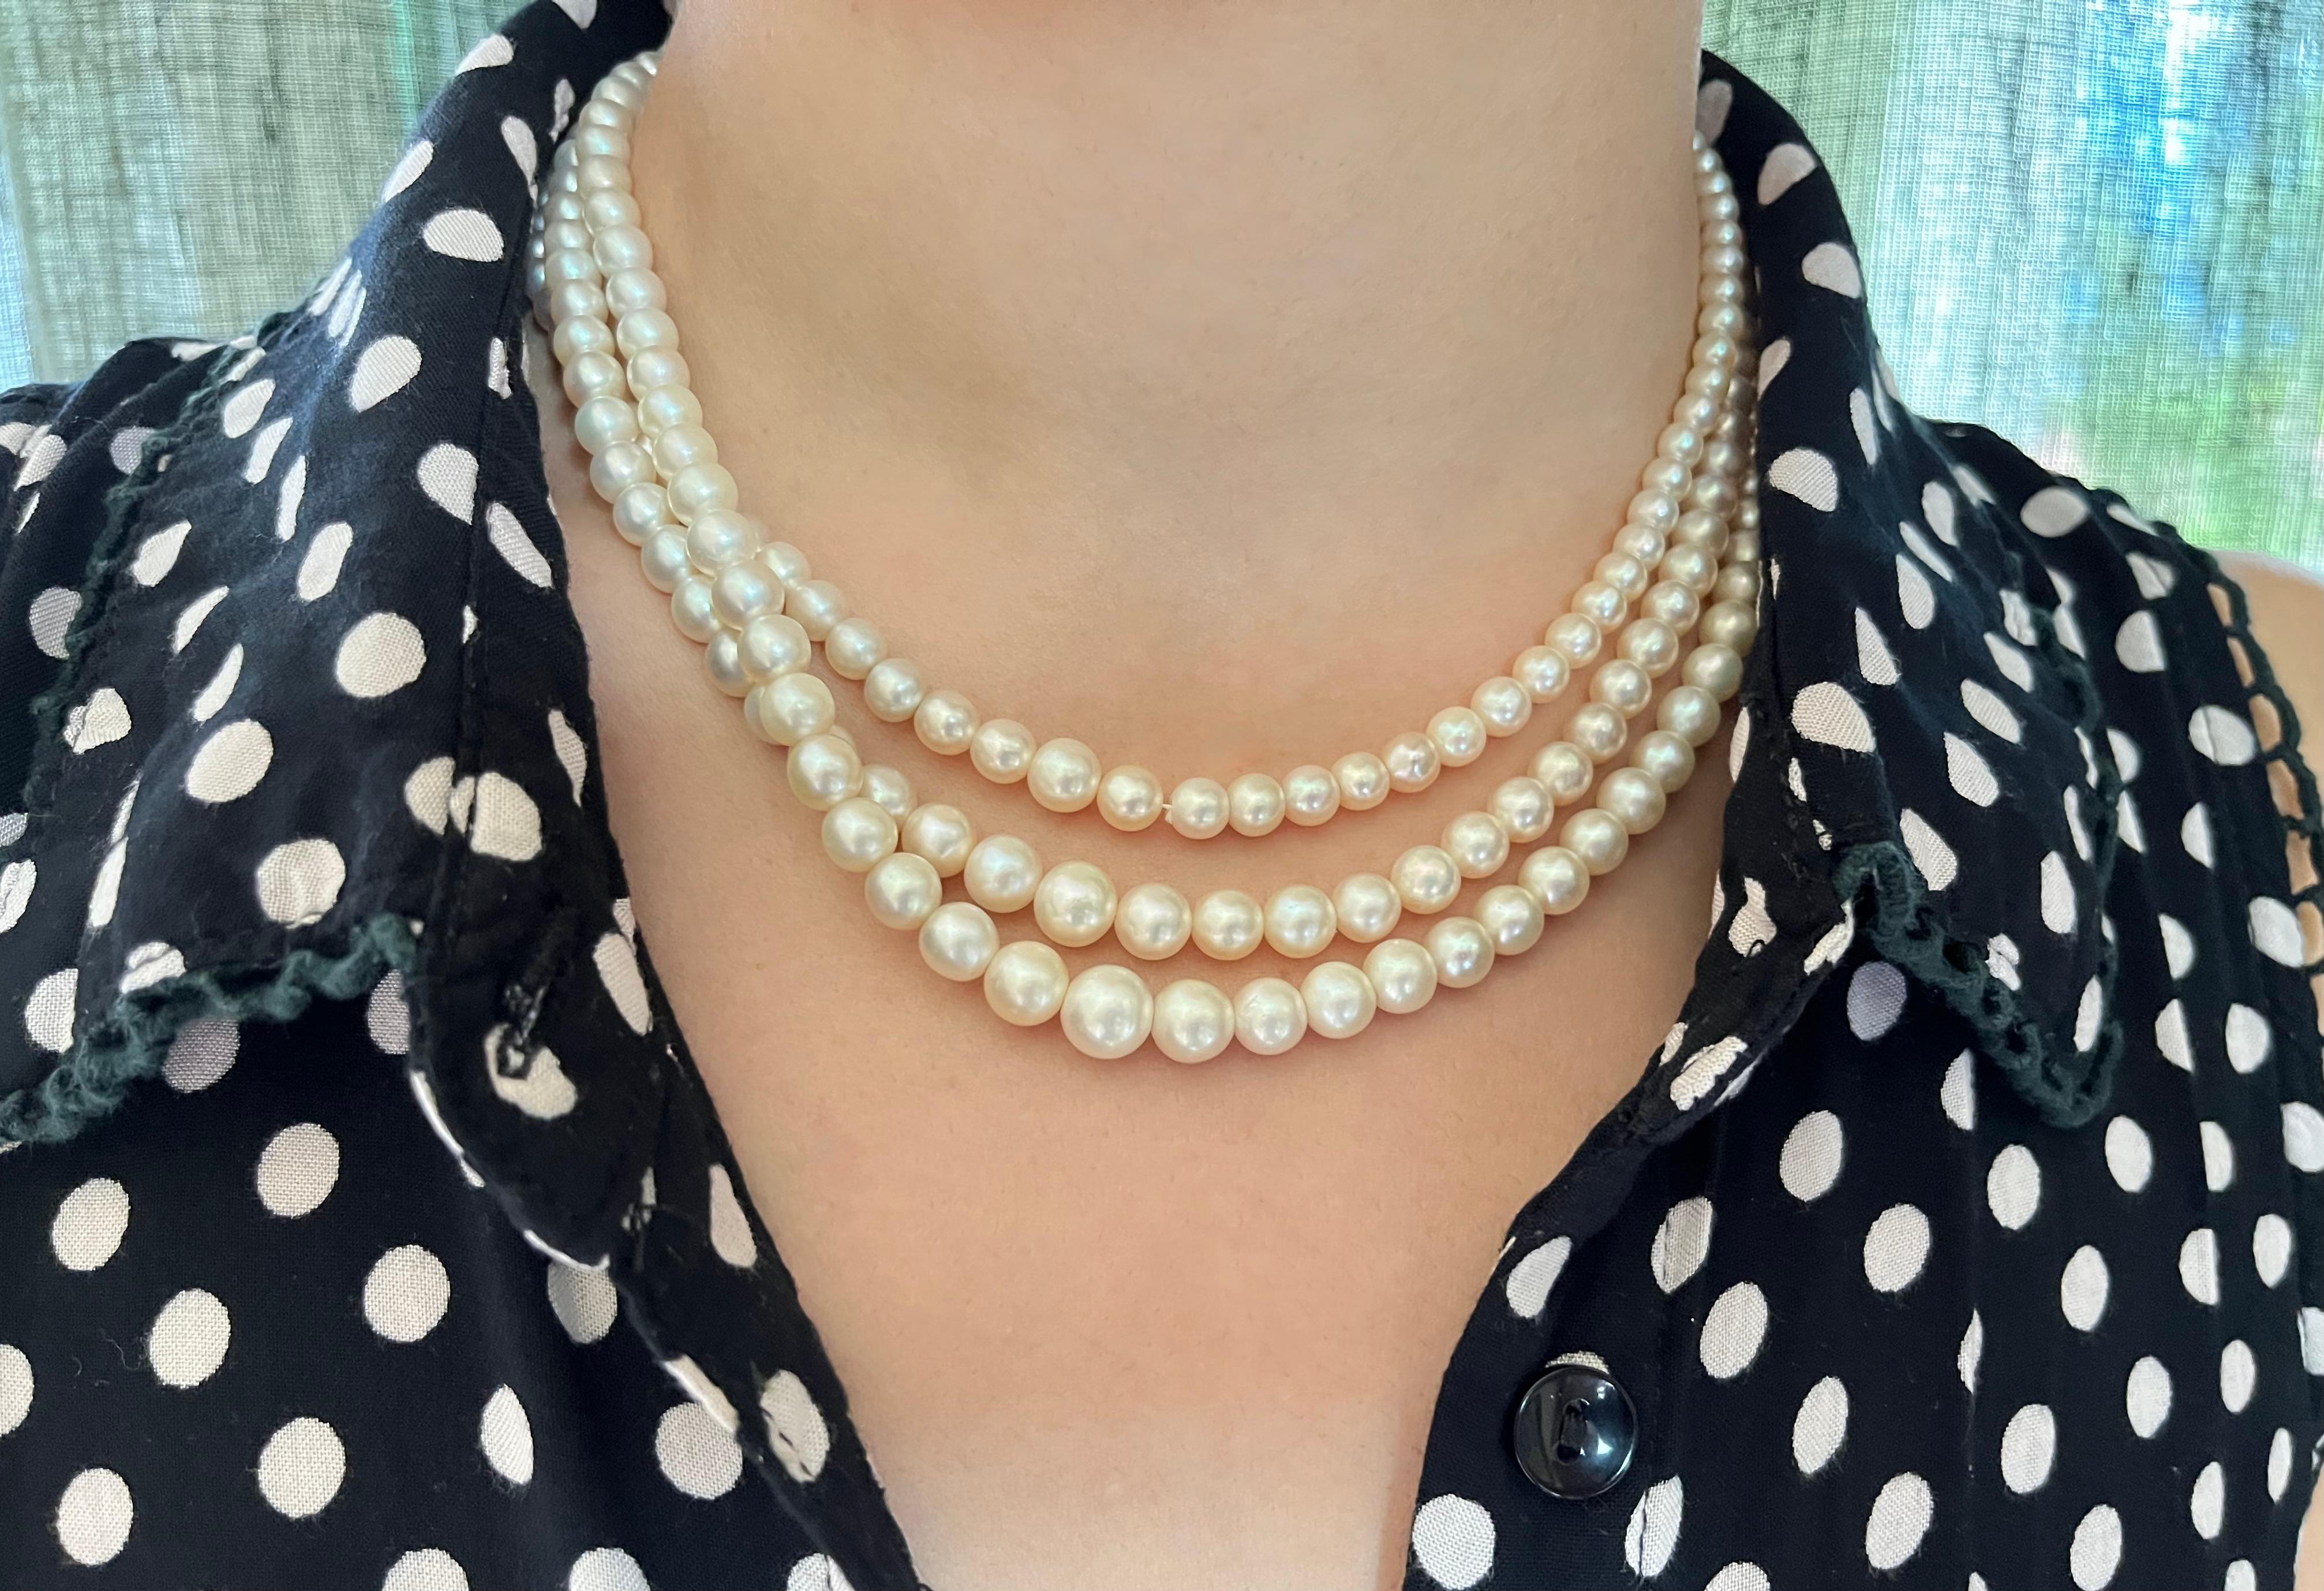 Platinum diamond natural pearl necklace circa 1900 
Three graduated strands with 245 slightly cream-coloured natural pearls of 4 to 8.5 millimeters, joined by an oval clasp set with 18 old mine cut diamonds weighing approximately 2 carats
42 cm/16.5